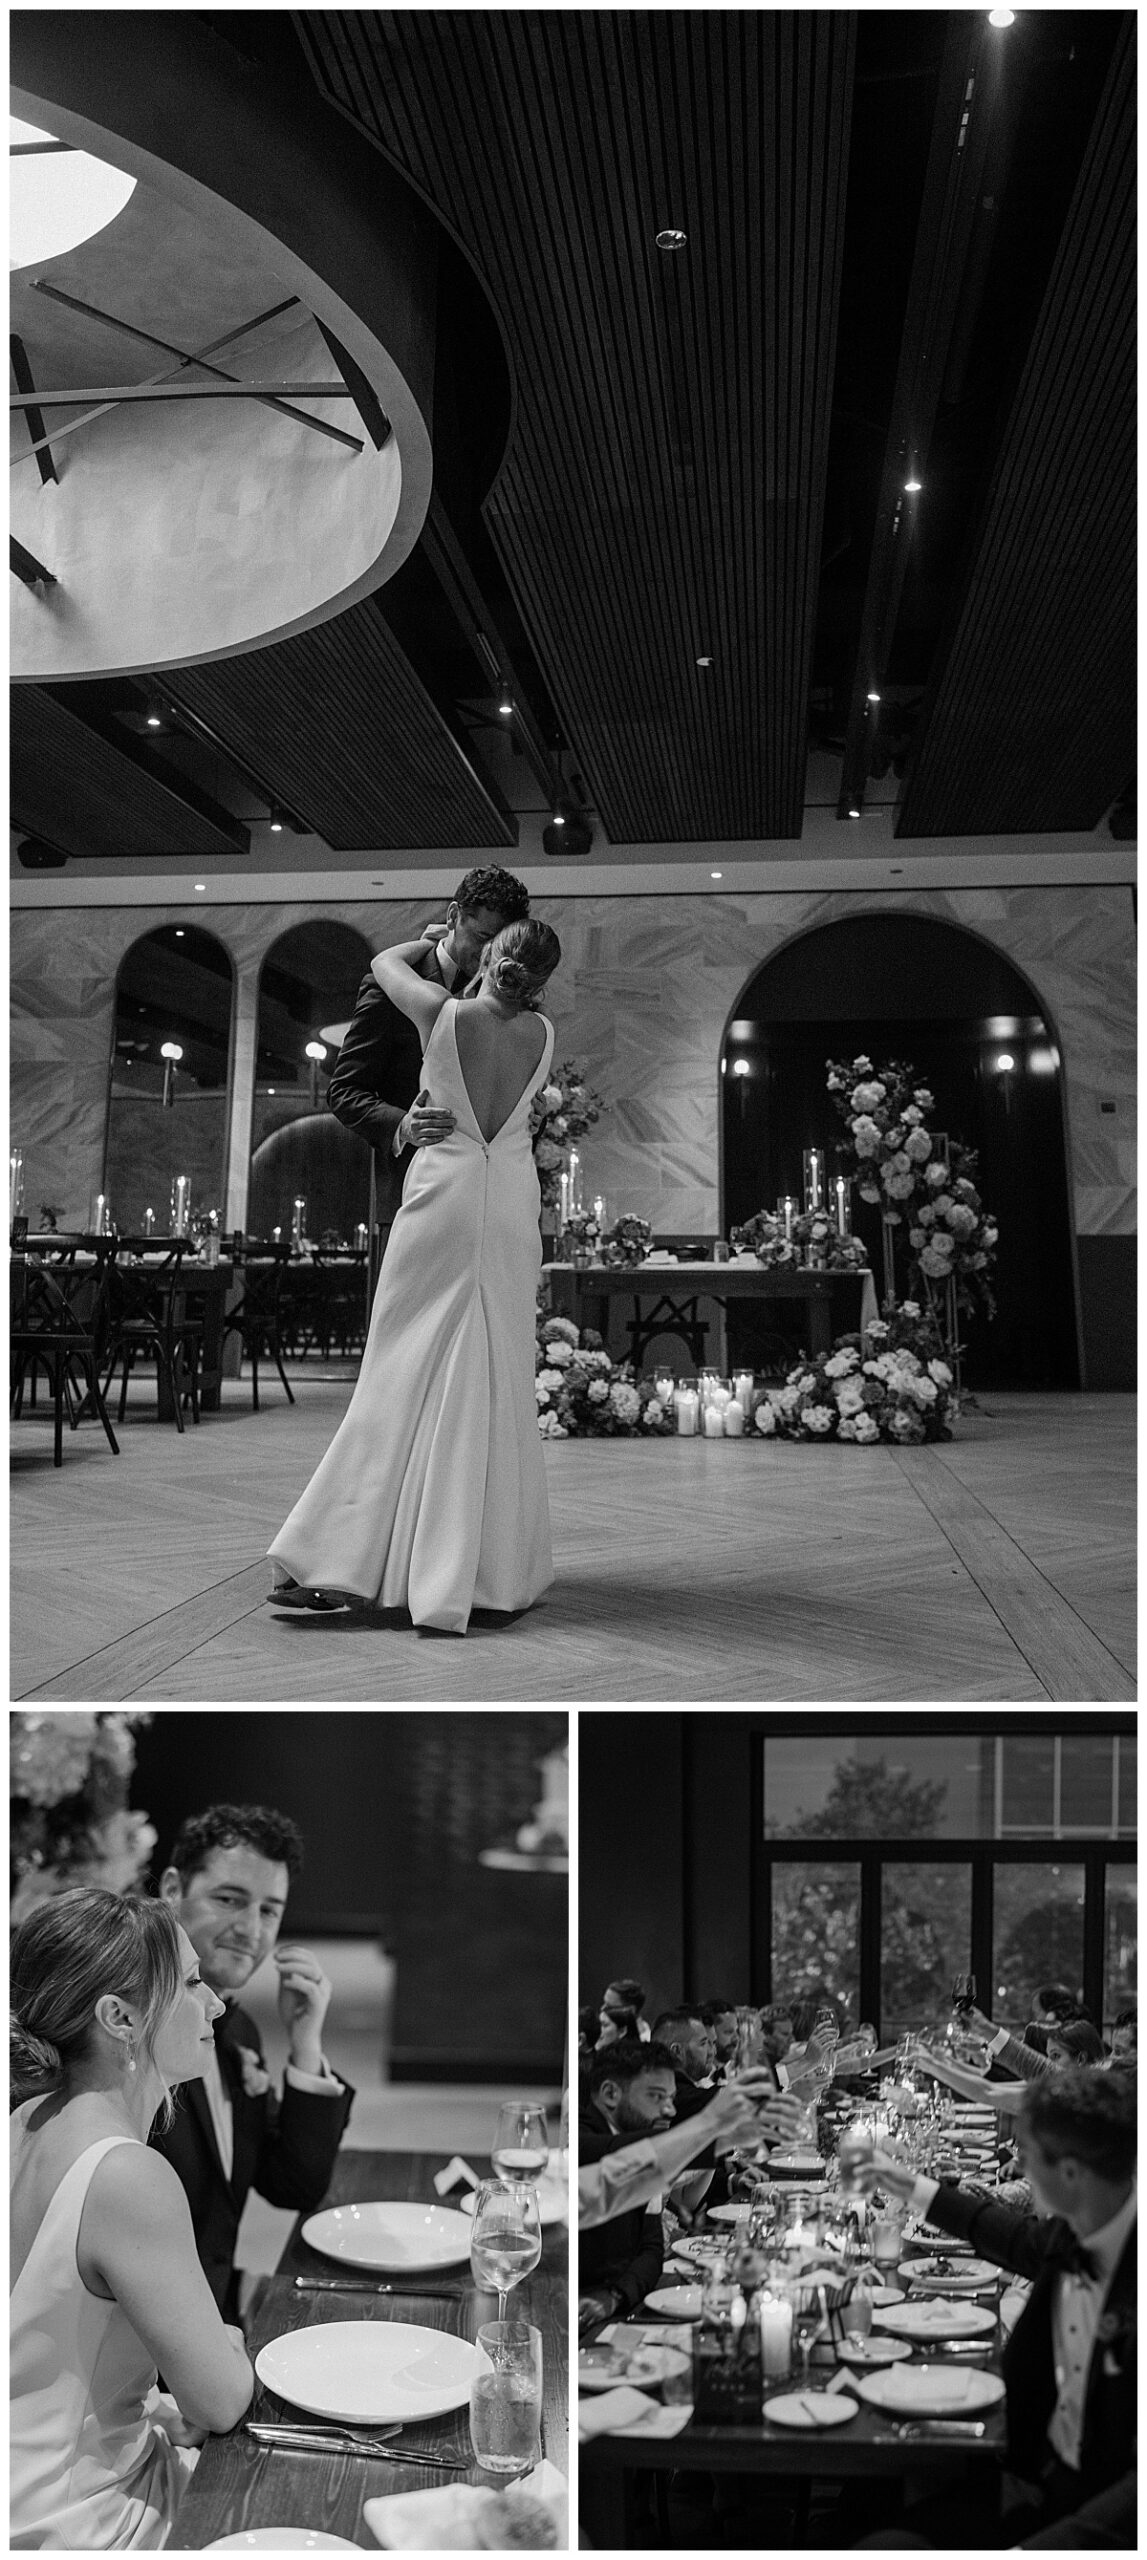 newlyweds dance together in empty reception hall by Indigo Lace Collective